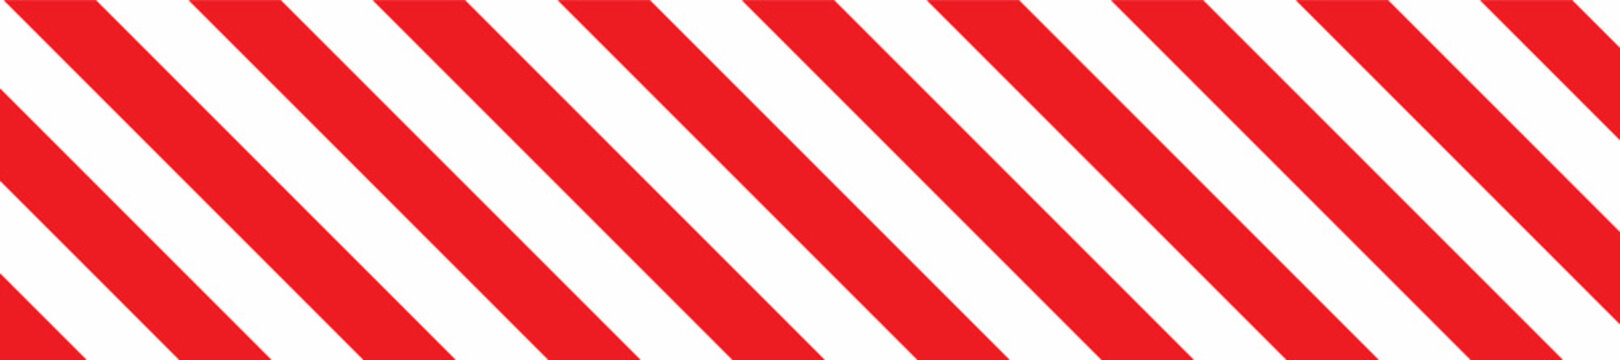 Red stripes on white background. Striped diagonal pattern Vector illustration of Seamless background Christmas or winter theme Background with slanted lines
